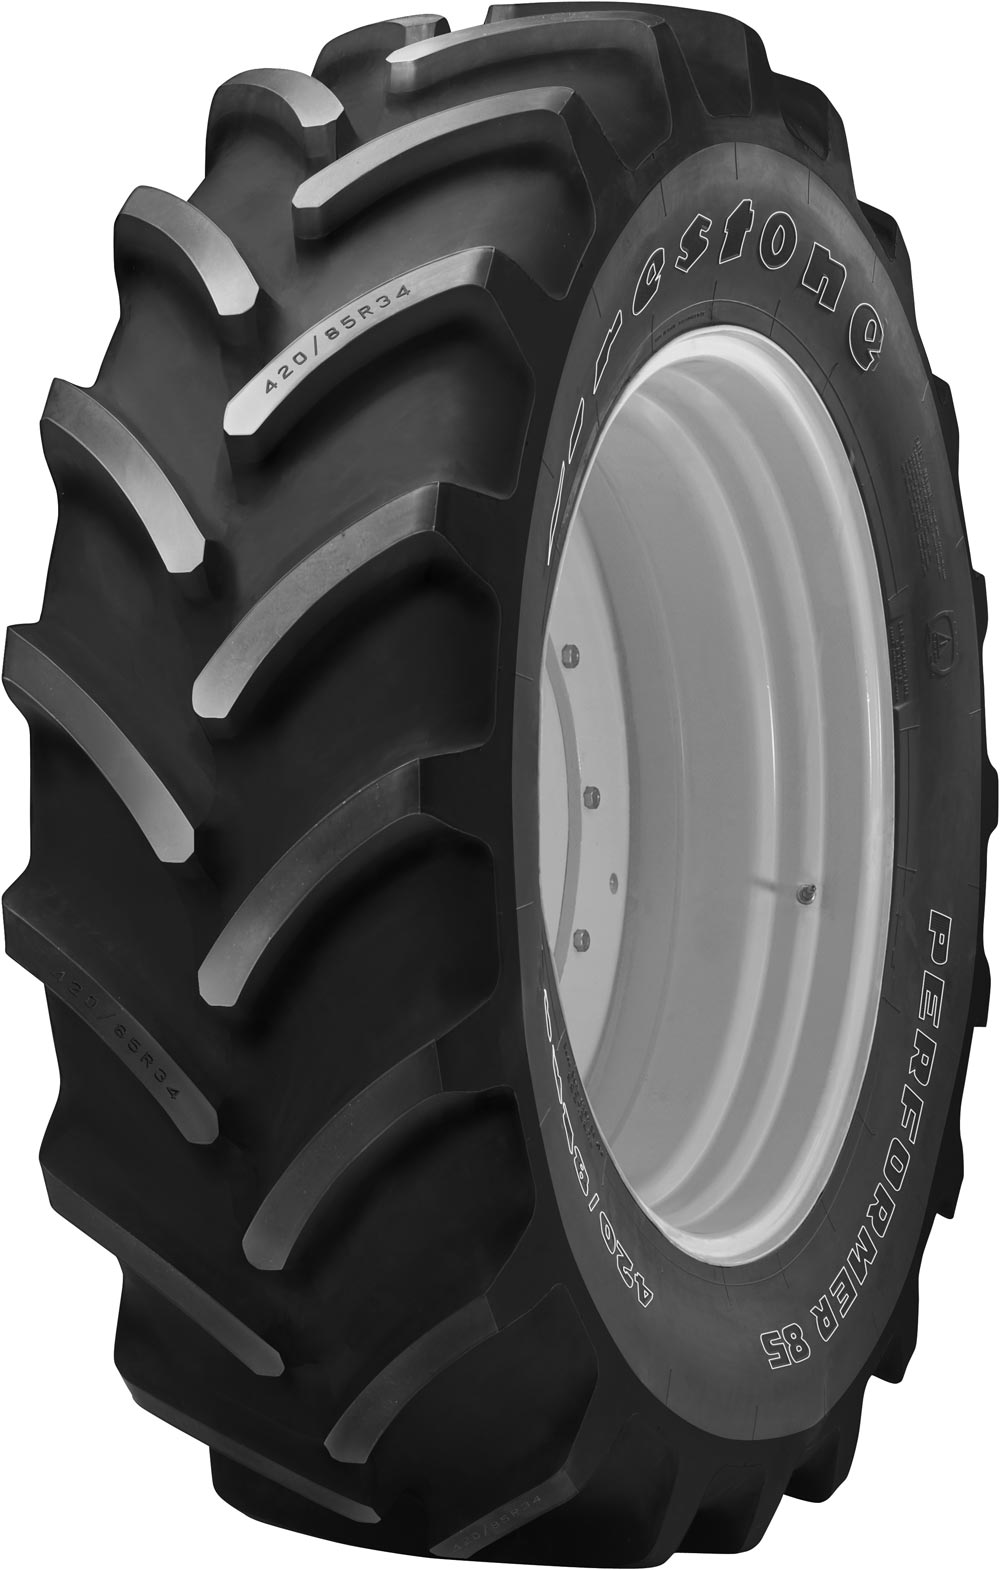 product_type-industrial_tires FIRESTONE PERF85 TL 280/85 R24 115D